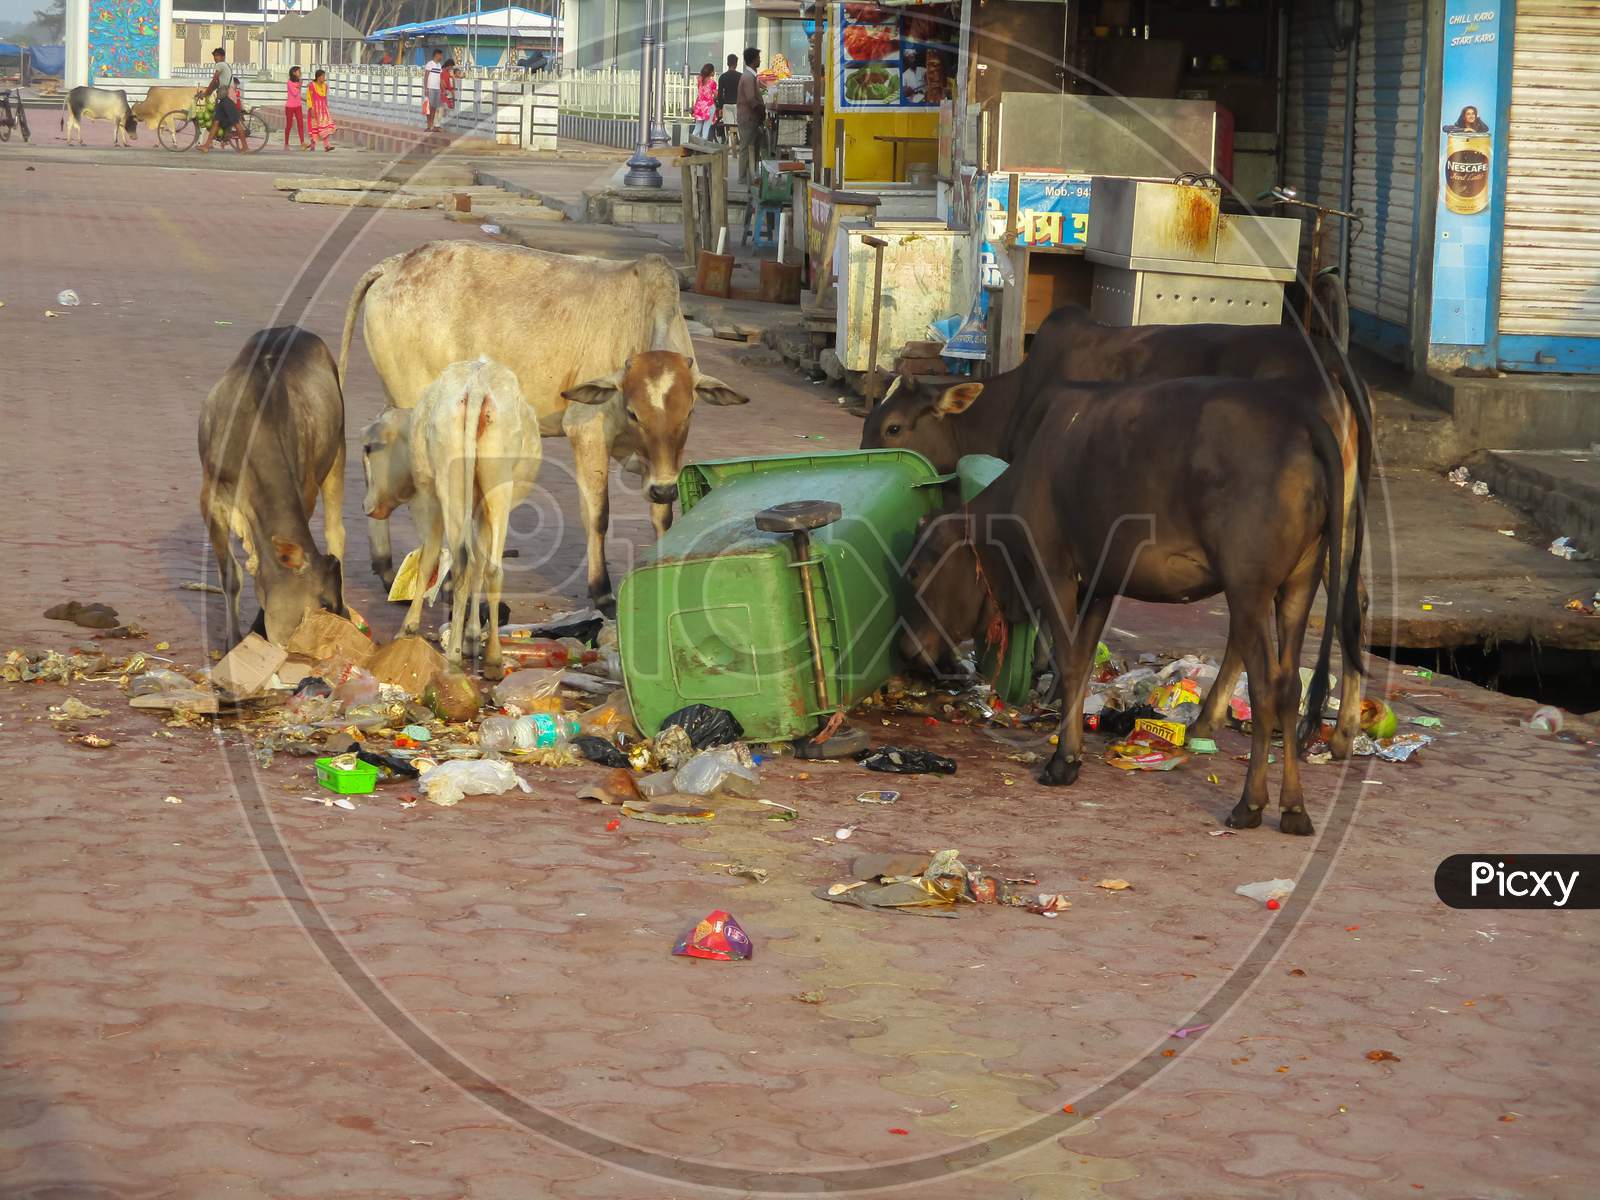 West Bengal , India May 14, 2019 : A Garbage Dump Has Fallen Down On The Road And Two Or Three Cows Were Searching Food From .